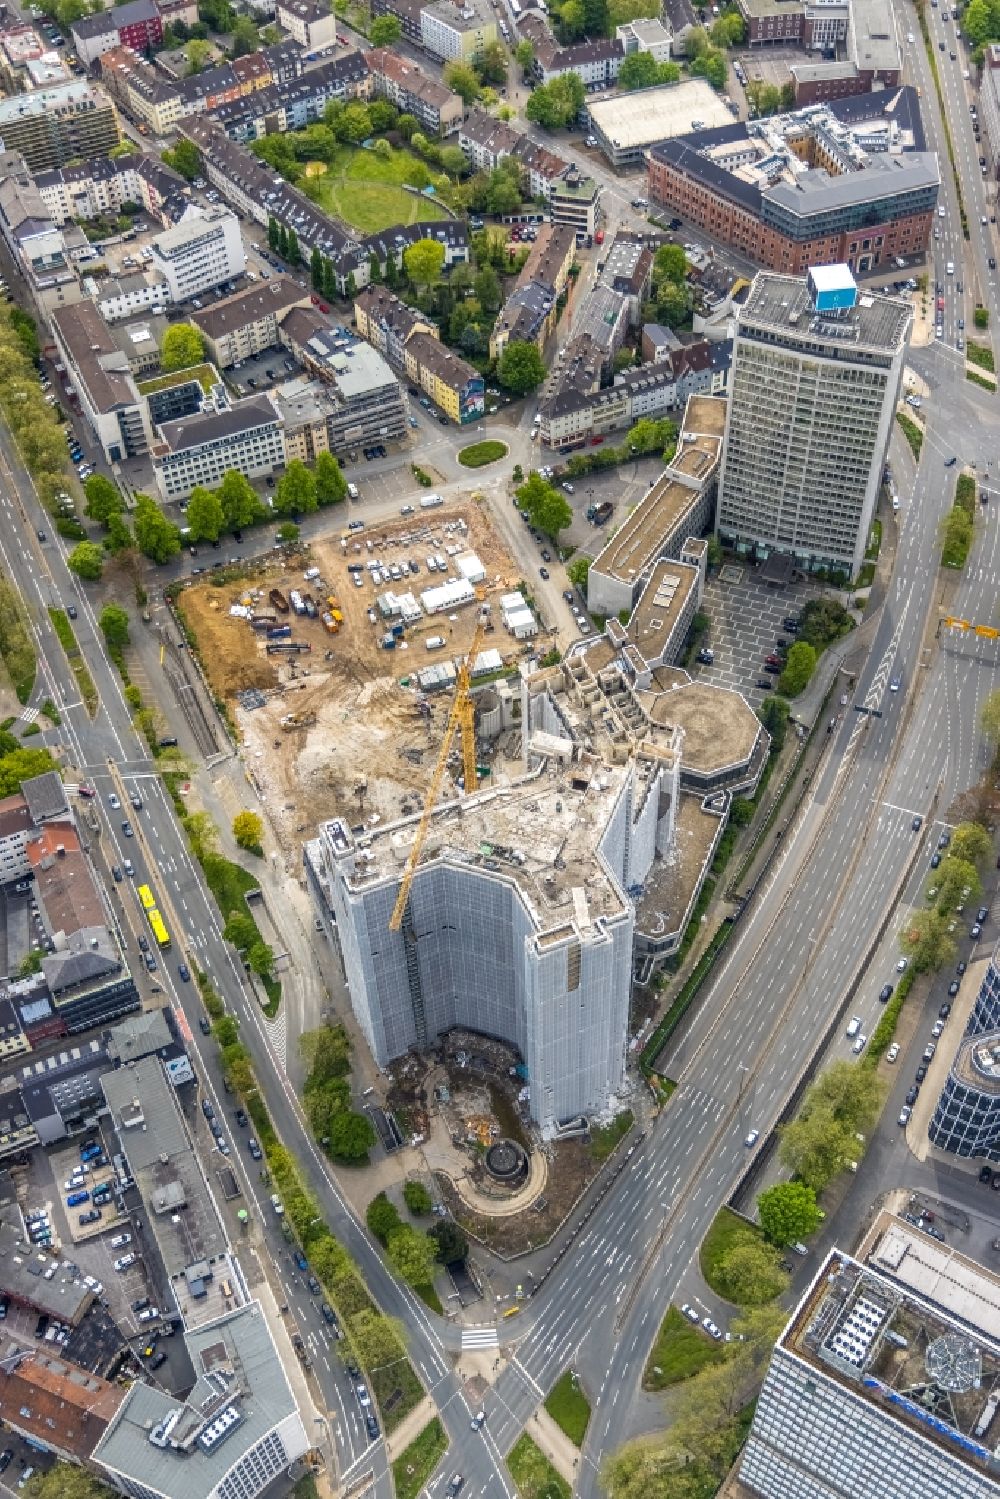 Aerial image Essen - Dismantling construction site to dismantle the high-rise building of the former RWE headquarters Ypsilon-Haus on Huyssenallee in the district Suedviertel in Essen in the Ruhr area in the state North Rhine-Westphalia, Germany